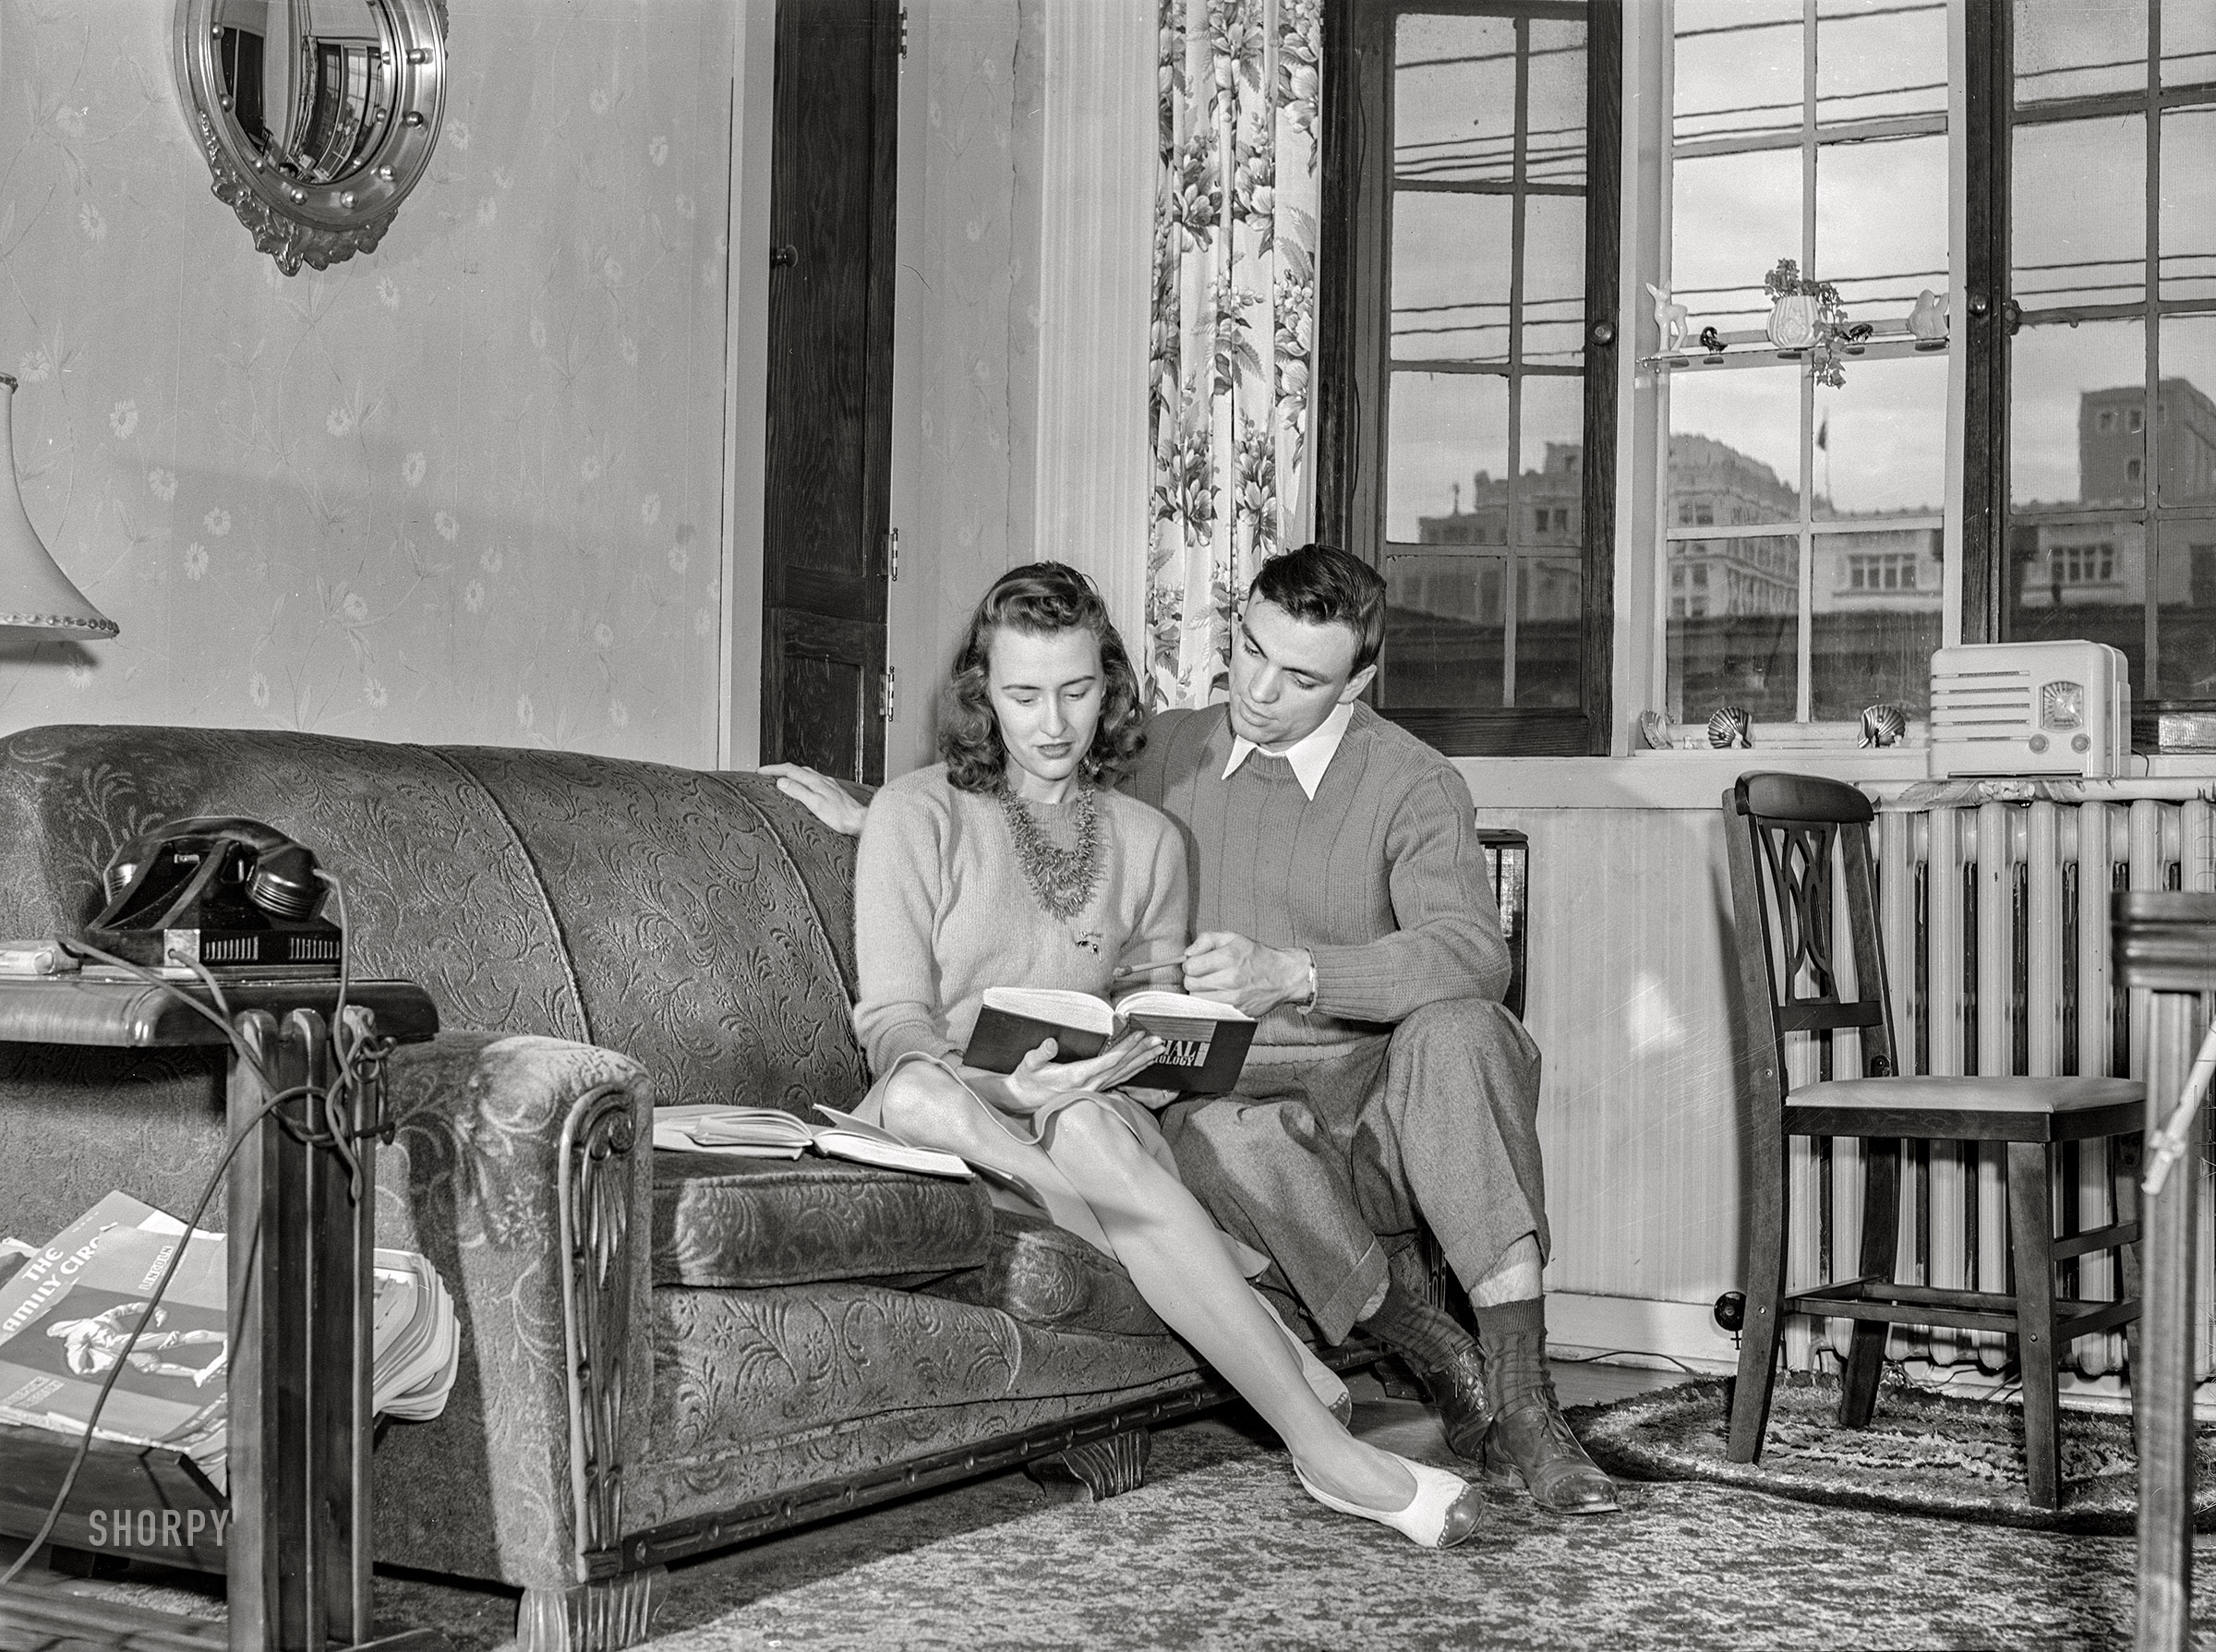 May 1942. Lincoln, Nebraska. "University of Nebraska during final exam and commencement week. Bob Aden studying with his wife in their apartment." Medium format acetate negative by John Vachon for the Office of War Information. View full size.